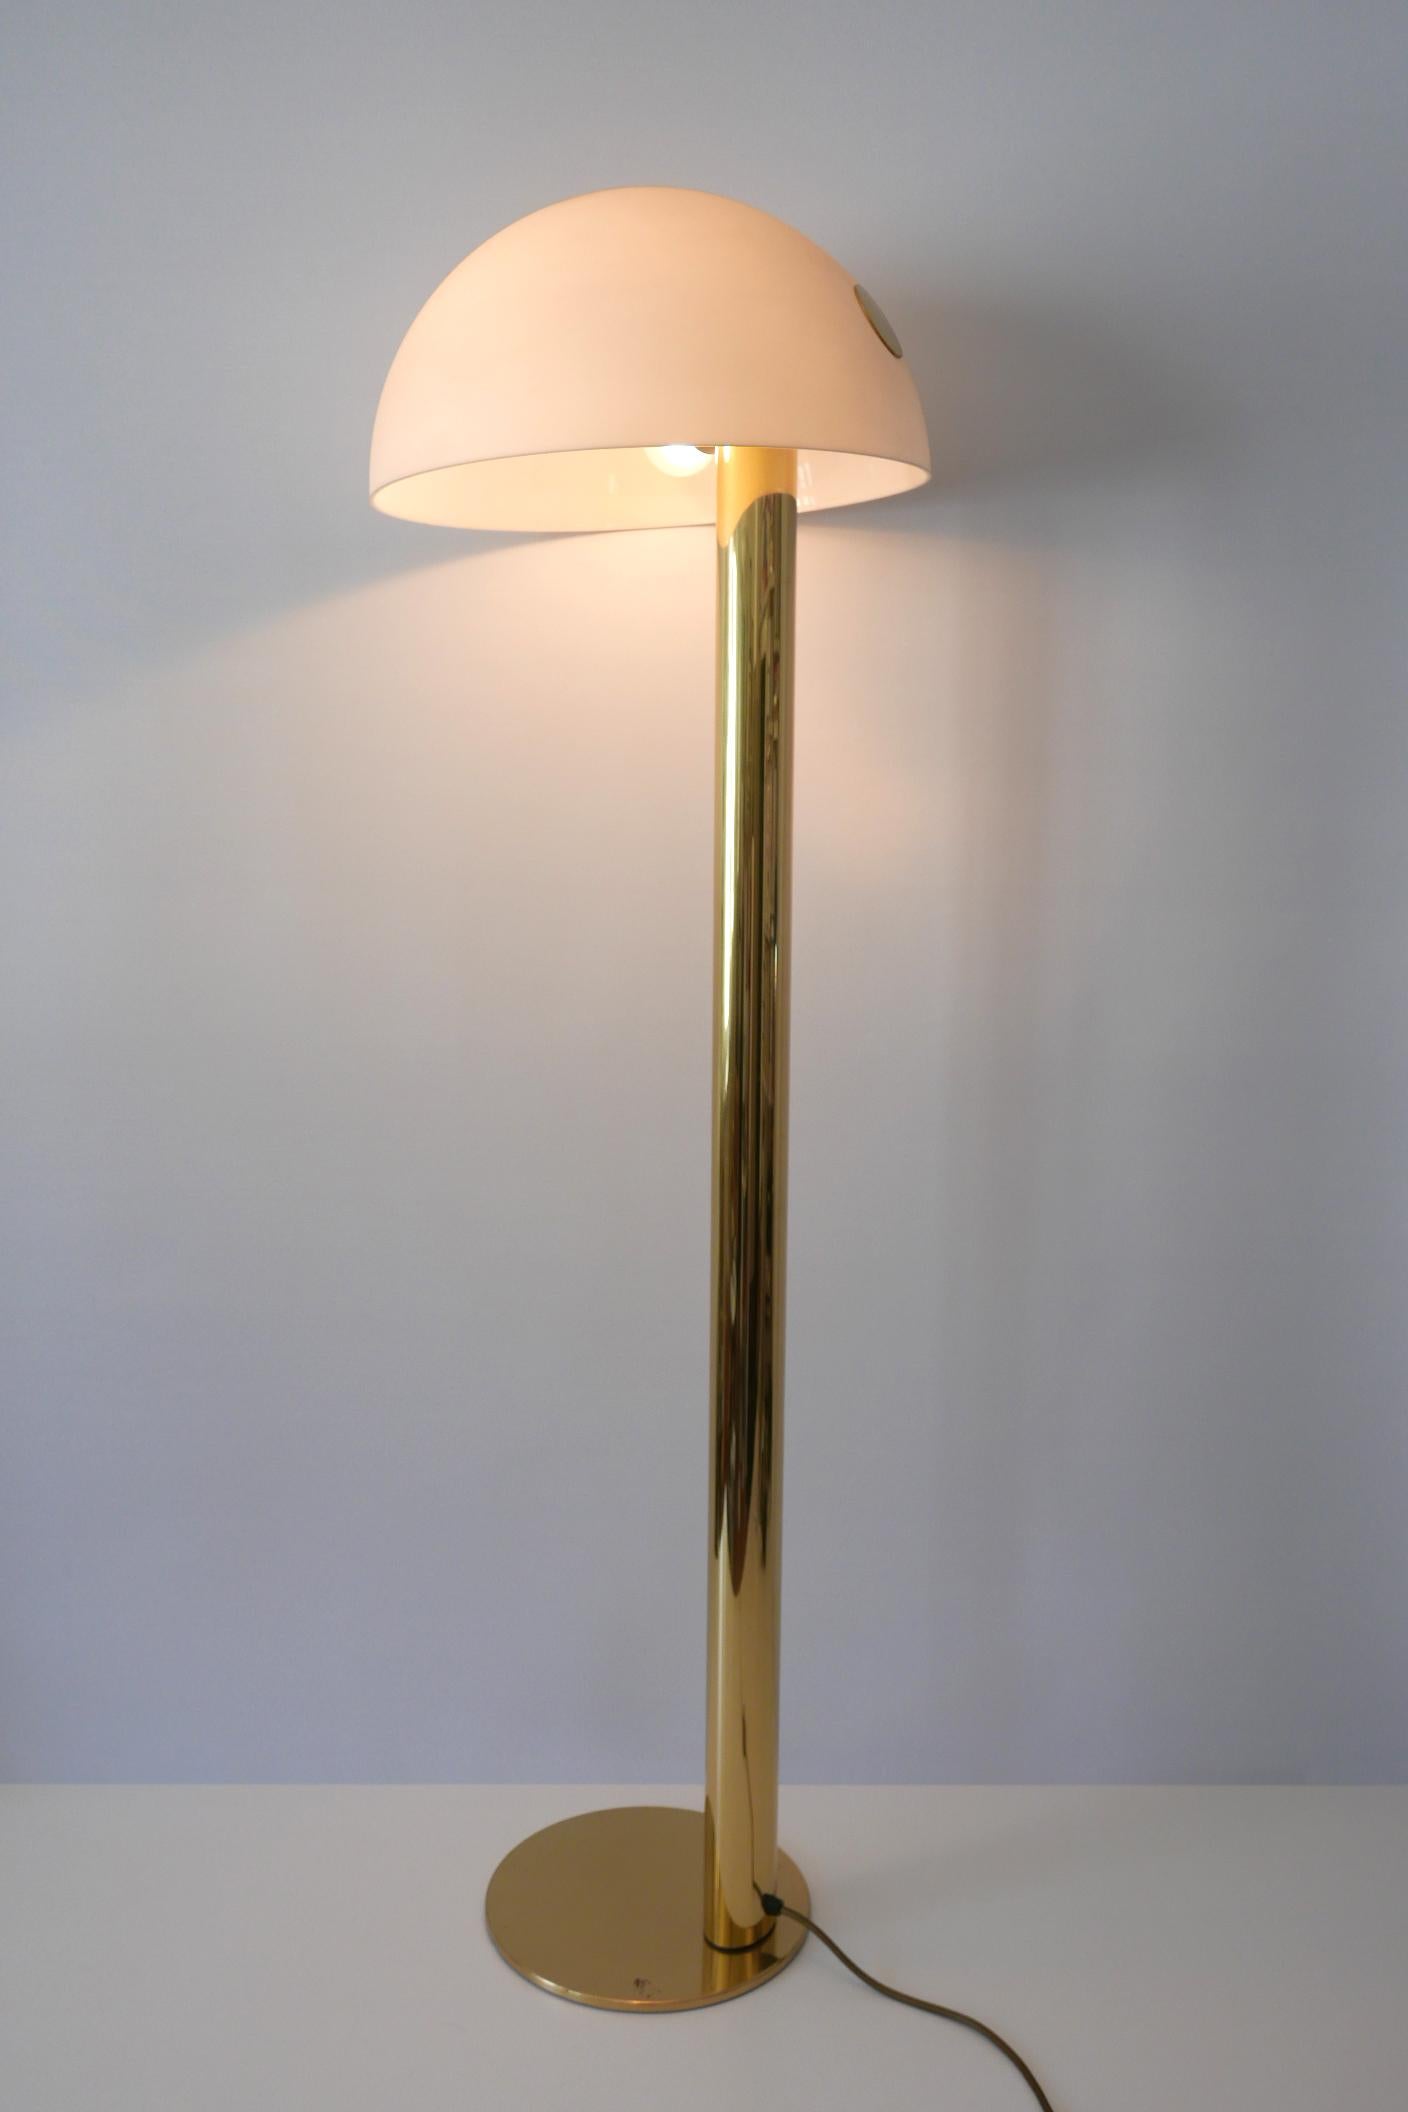 Rare and elegant Mid-Century Modern floor lamp. Designed and manufactured probably by Florian Schulz, 1970s, Germany.

Executed in brass and plastic, the lamp needs 2 x E27 Edison screw fit bulbs, is wired, and in working condition. It runs both on